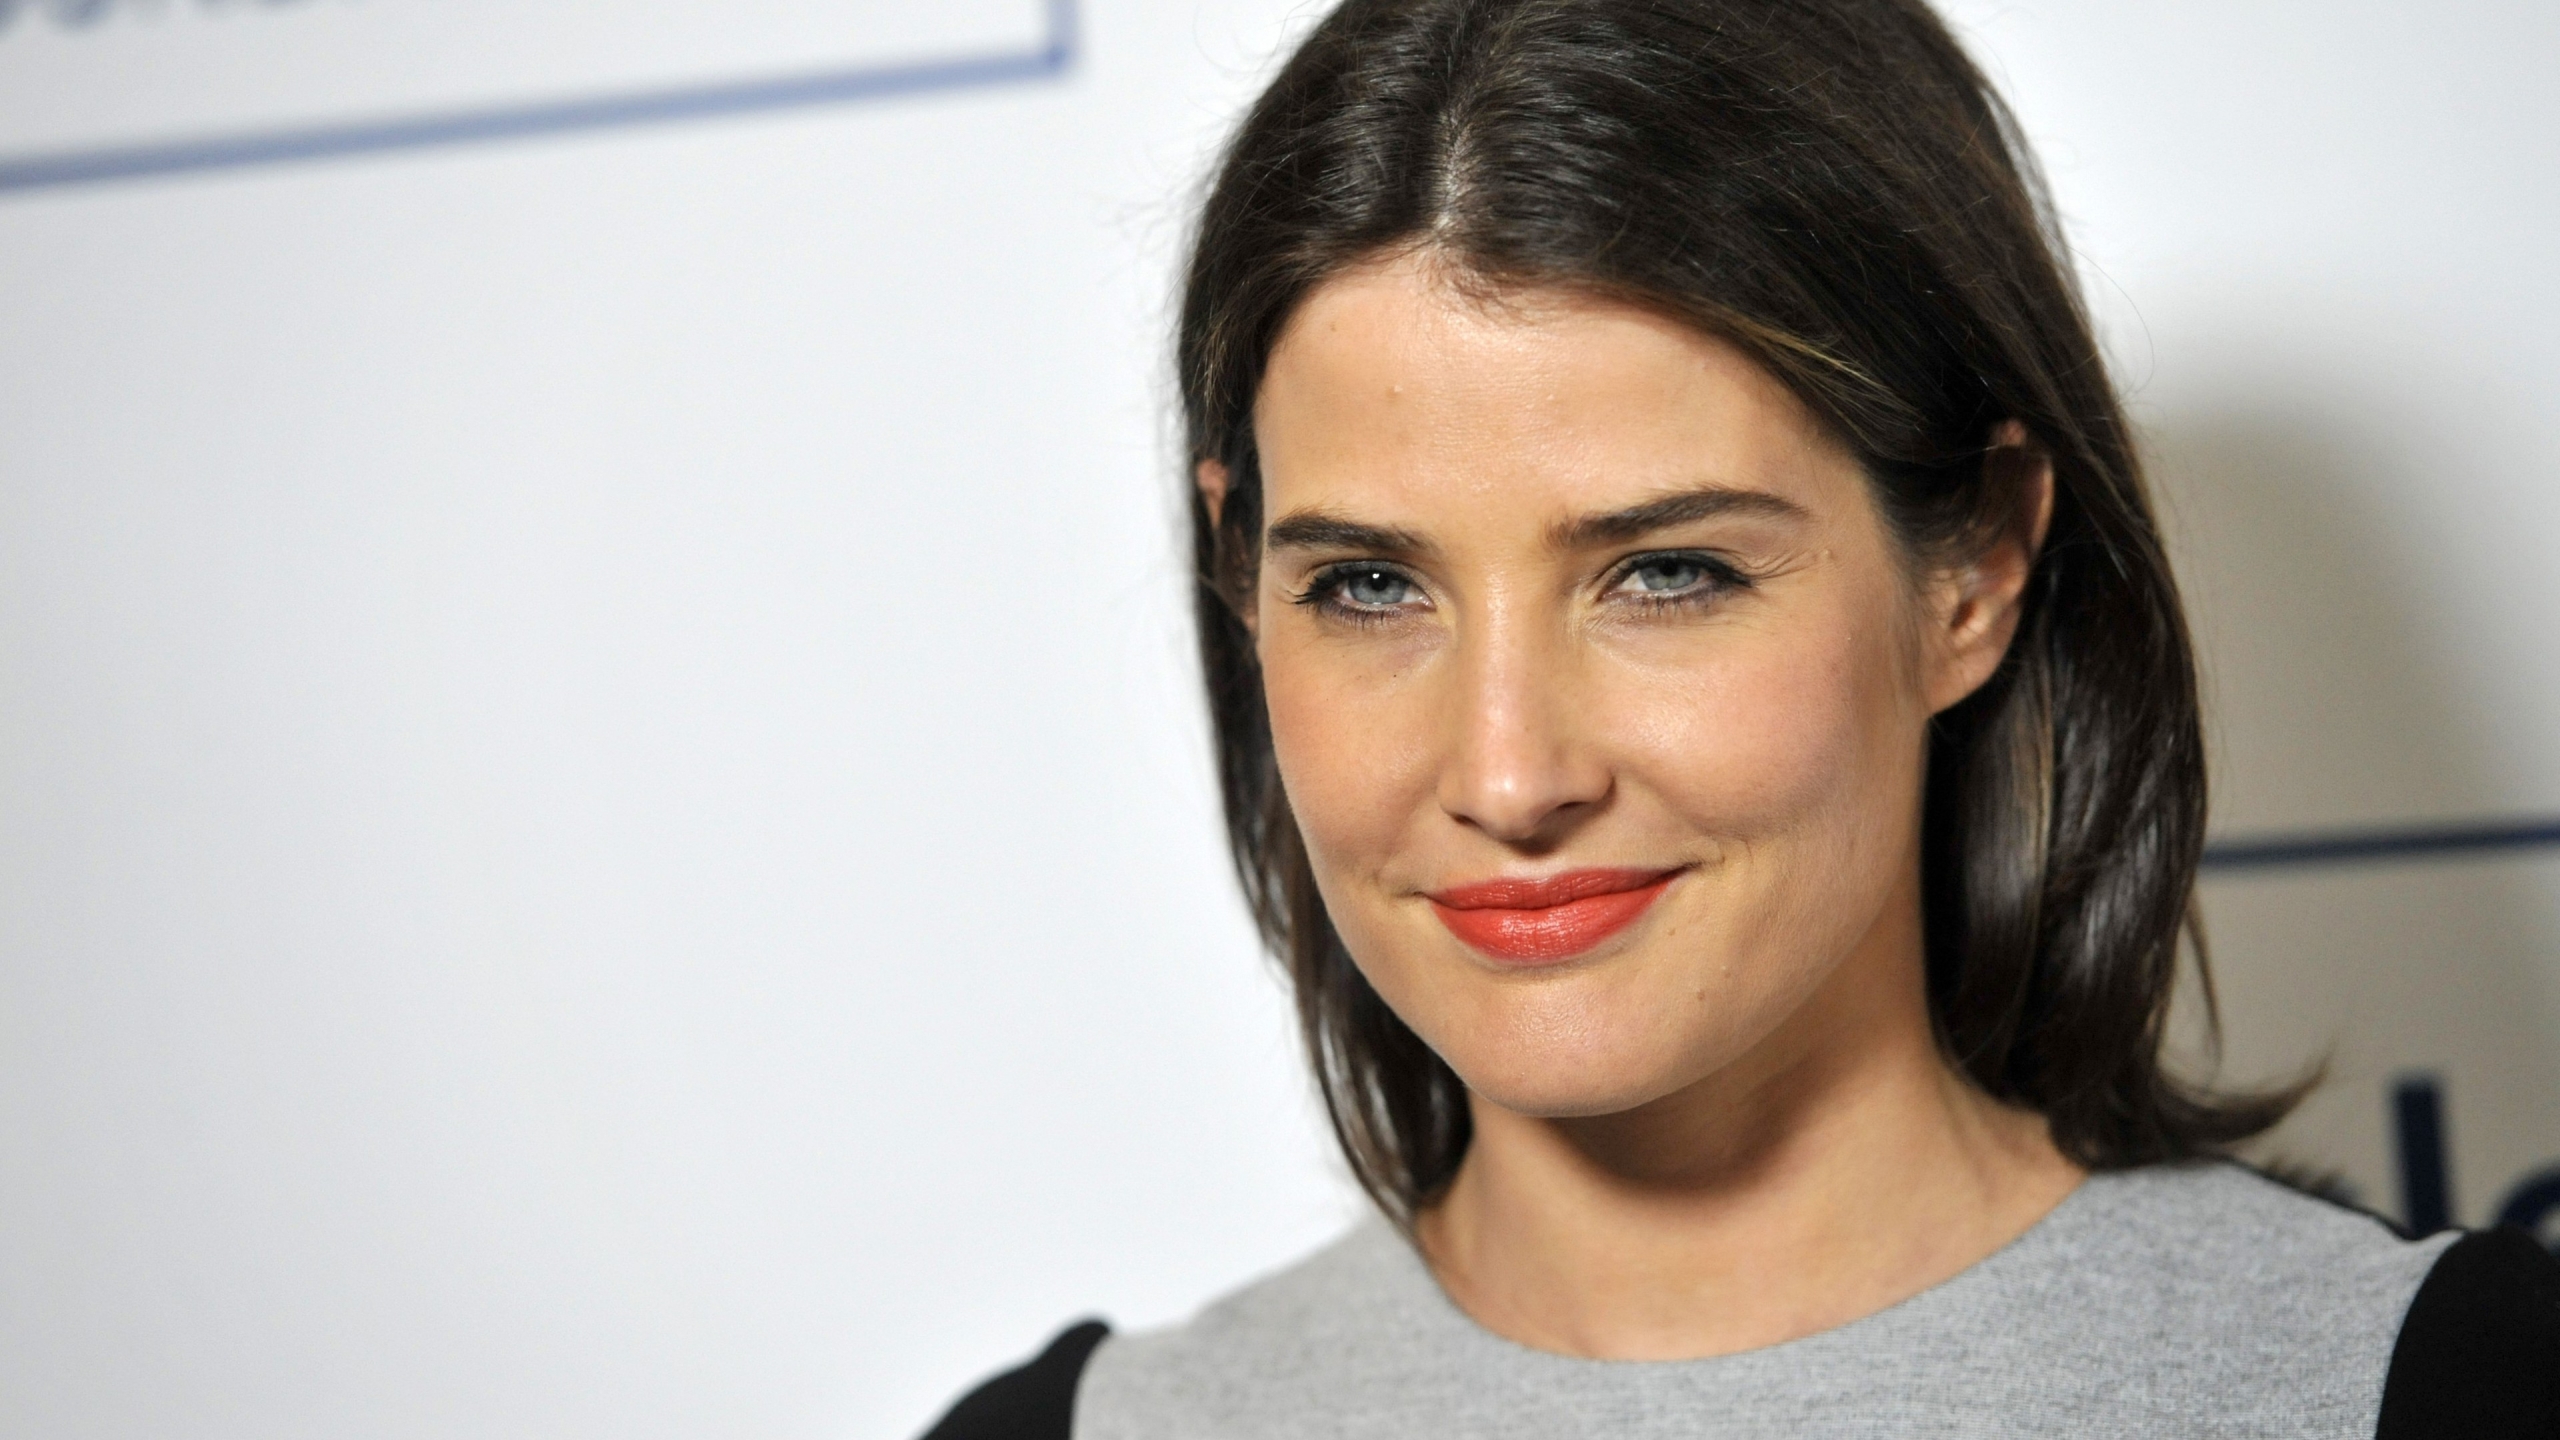 Cobie Smulders for 2560x1440 HDTV resolution